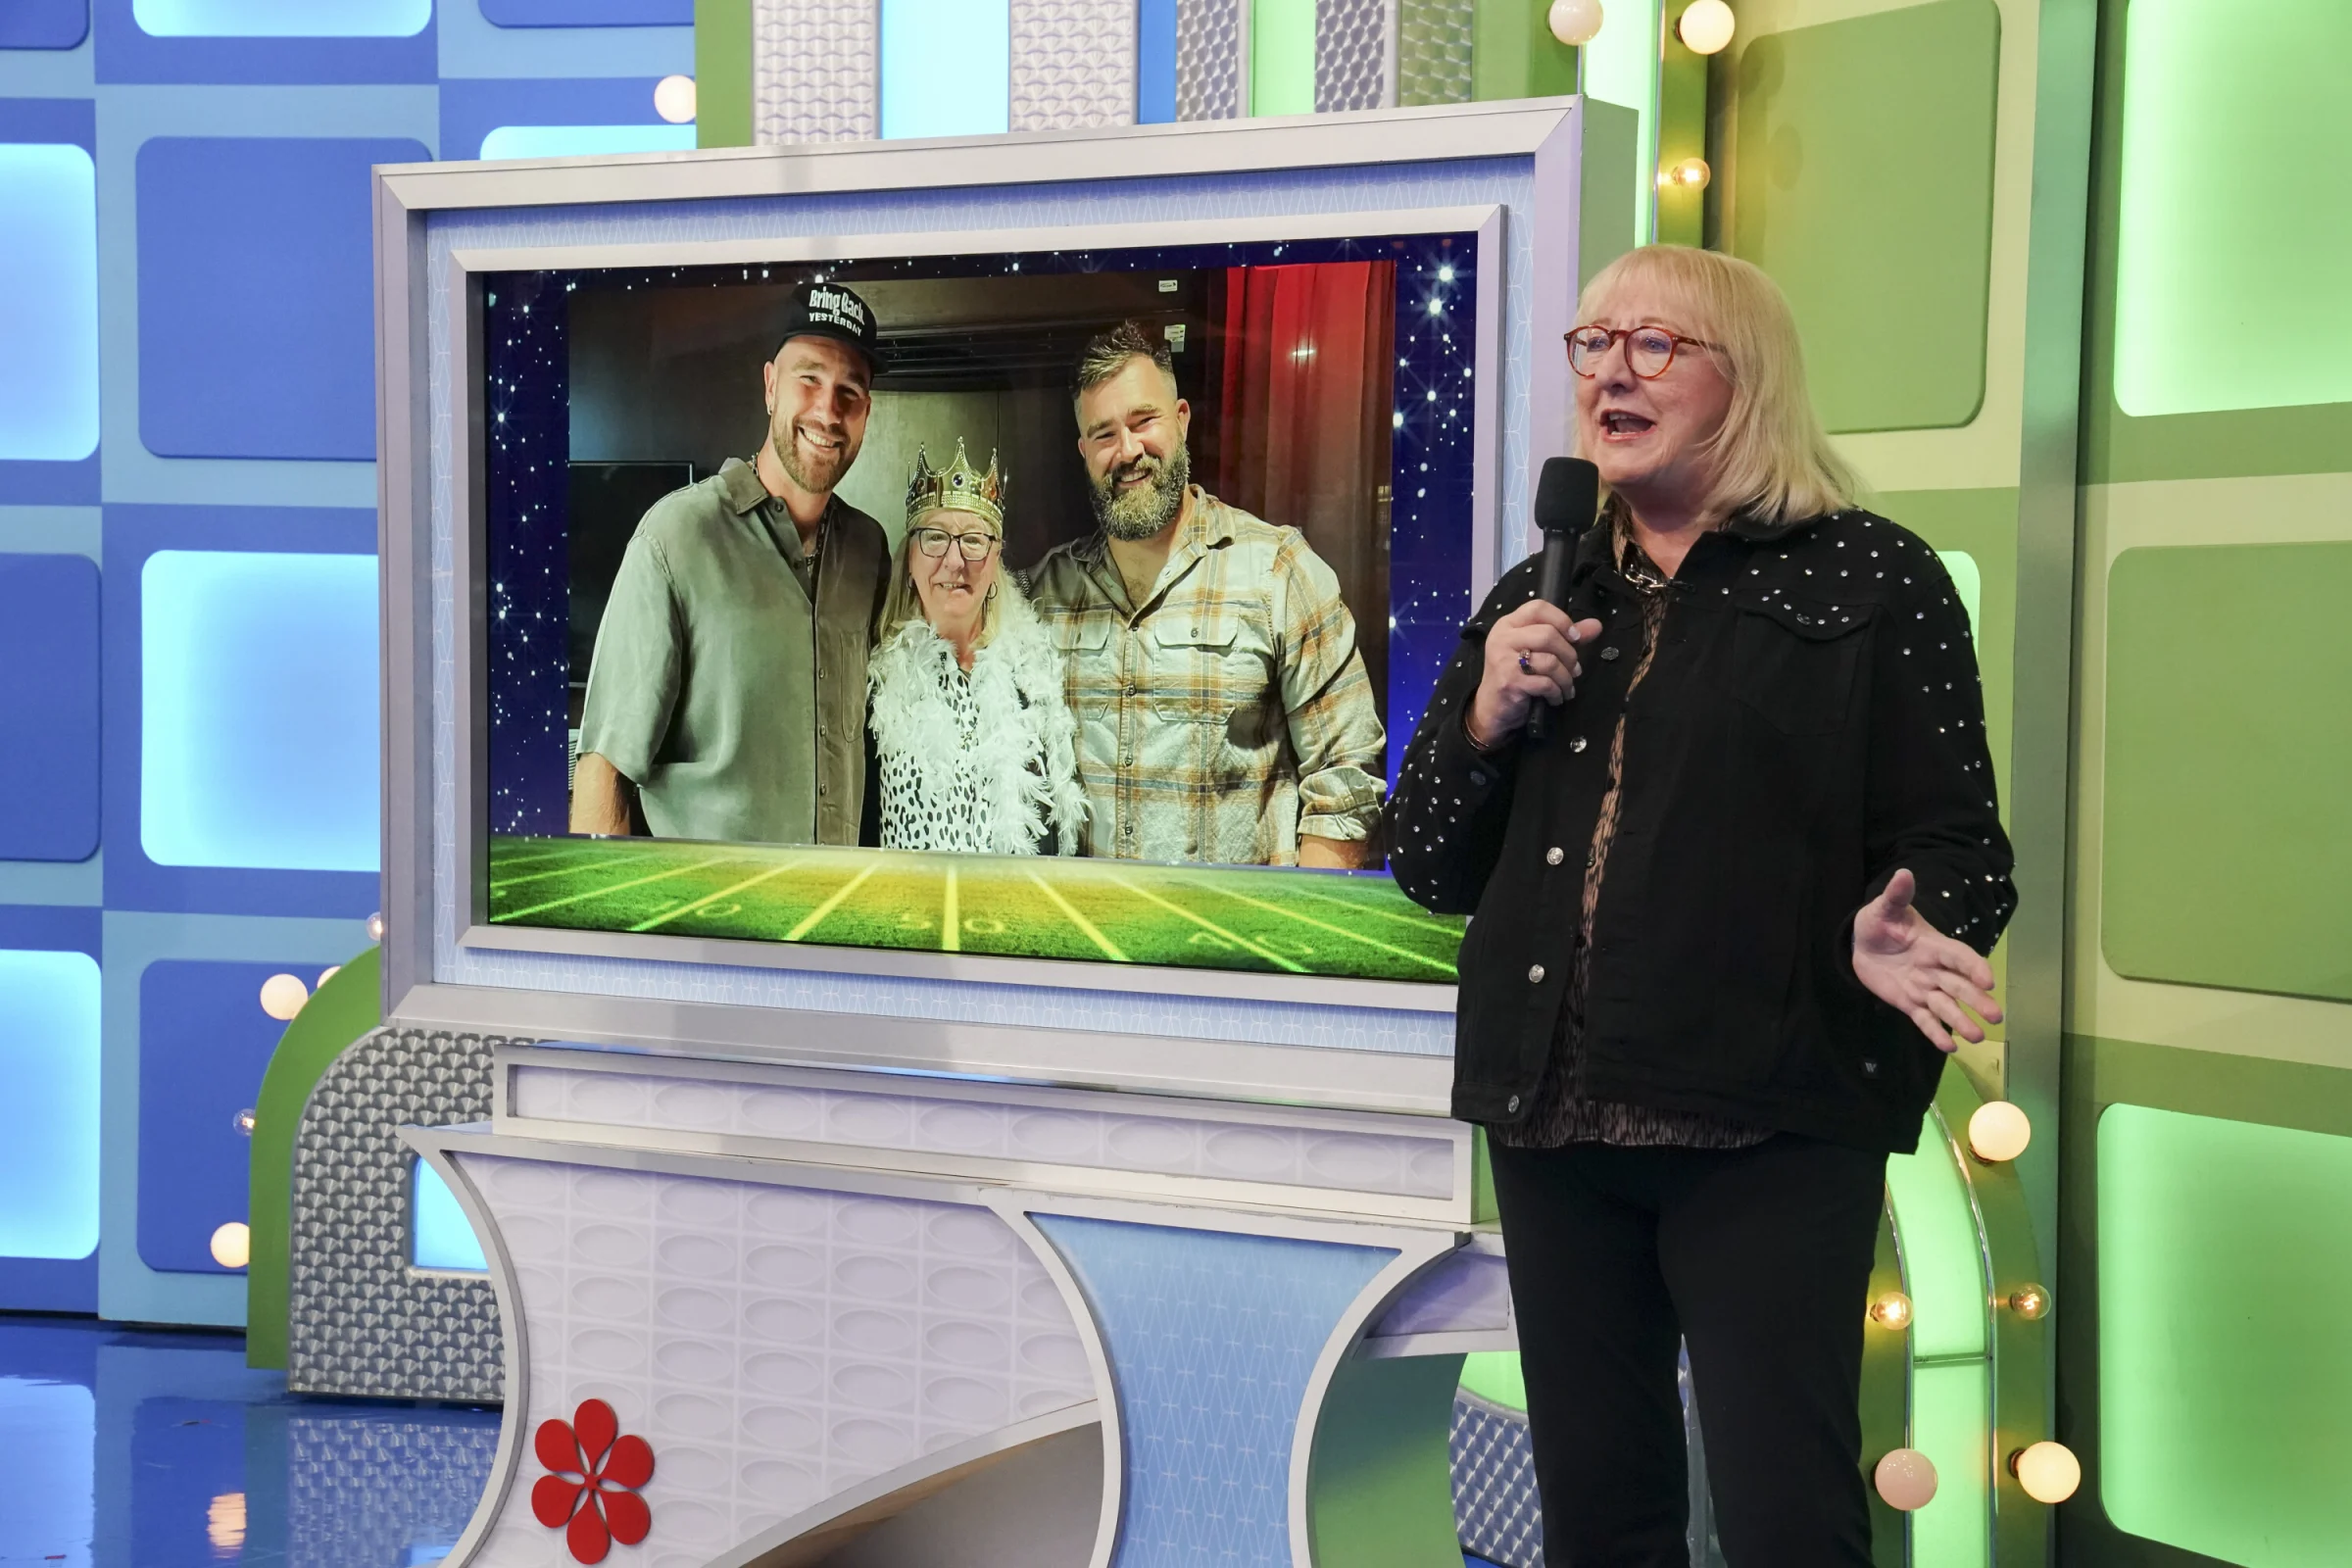 The mother of NFL stars Travis and Jason Kelce will make a special appearance on “The Price Is Right at Night” on Feb. 7 at 8 p.m. Her sons will serve as guest stars on the show via video.